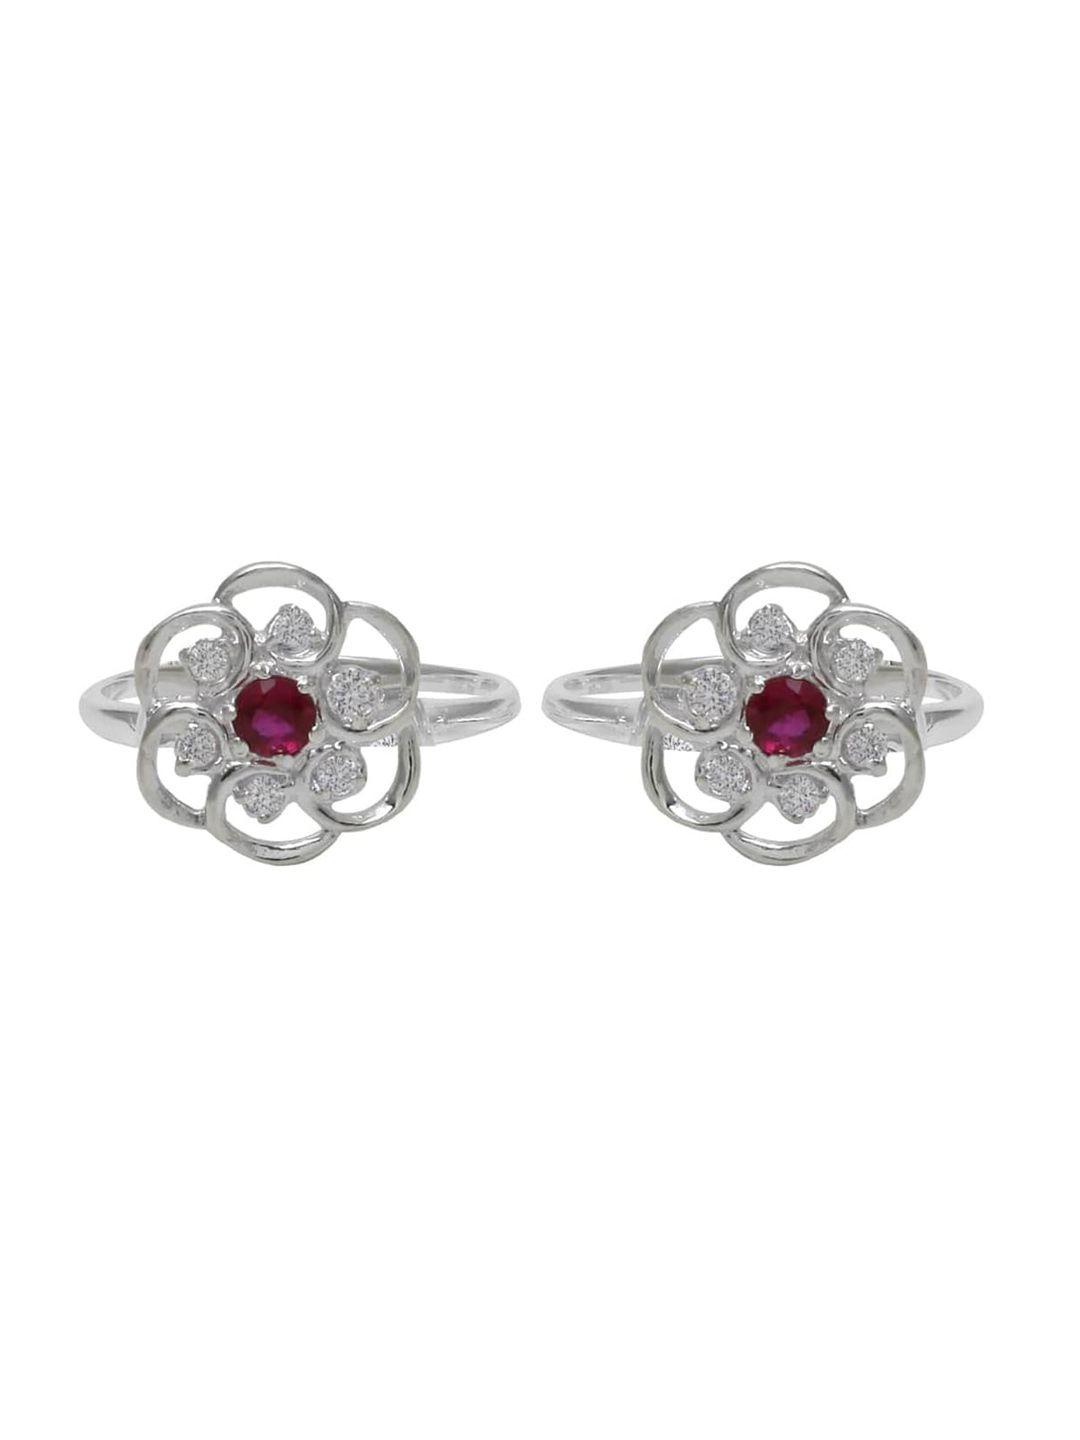 abhooshan 92.5 sterling silver cz-studded adjustable toe rings